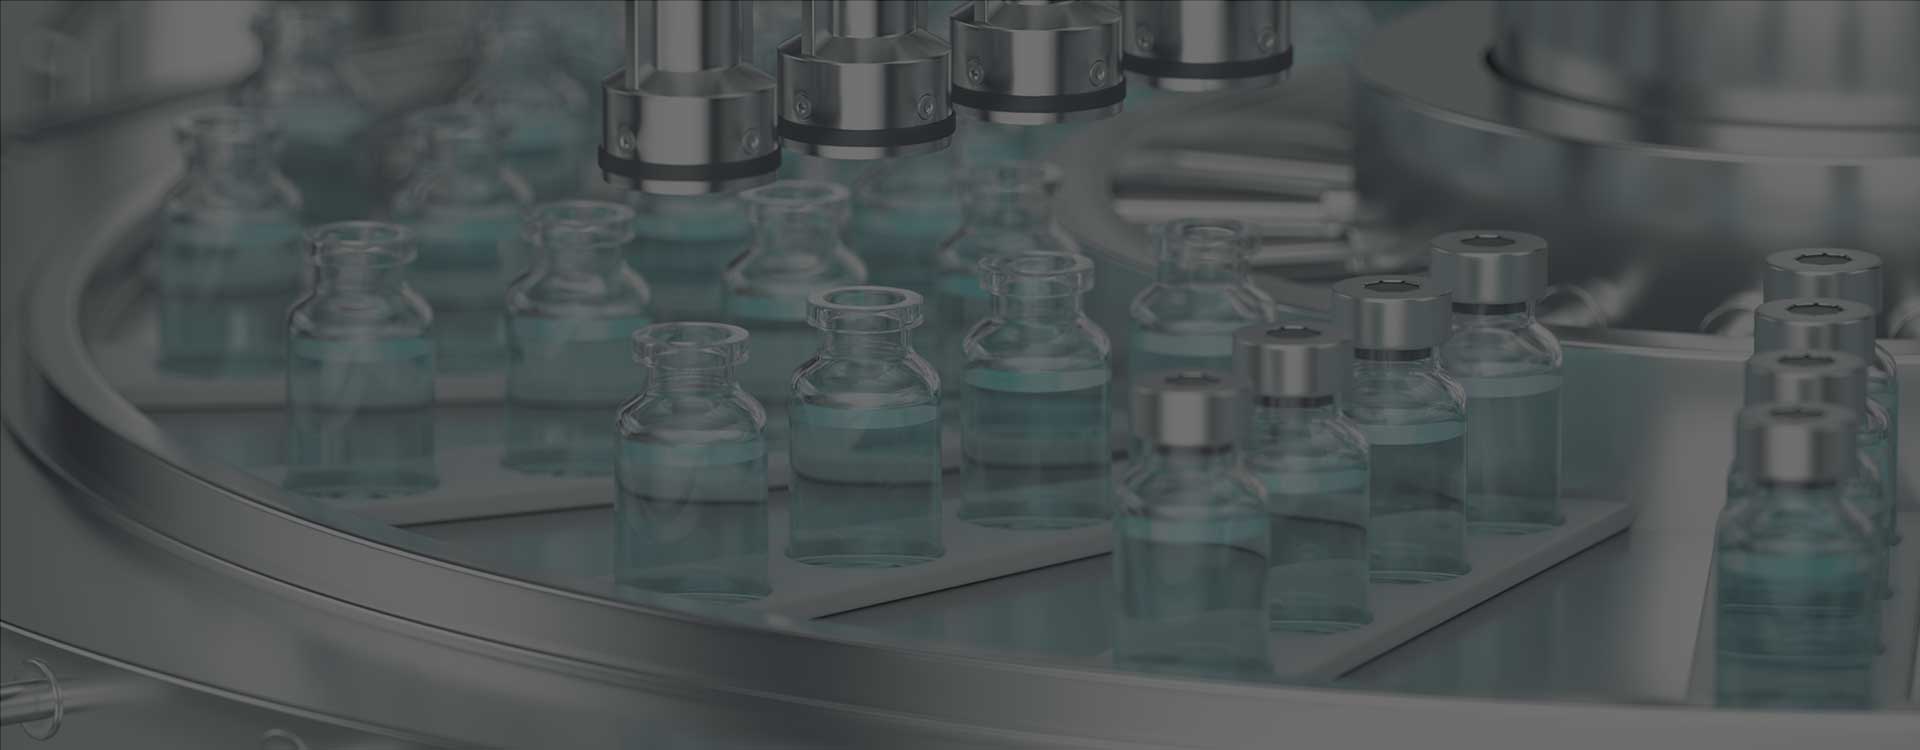 Pharmaceutical manufacture background